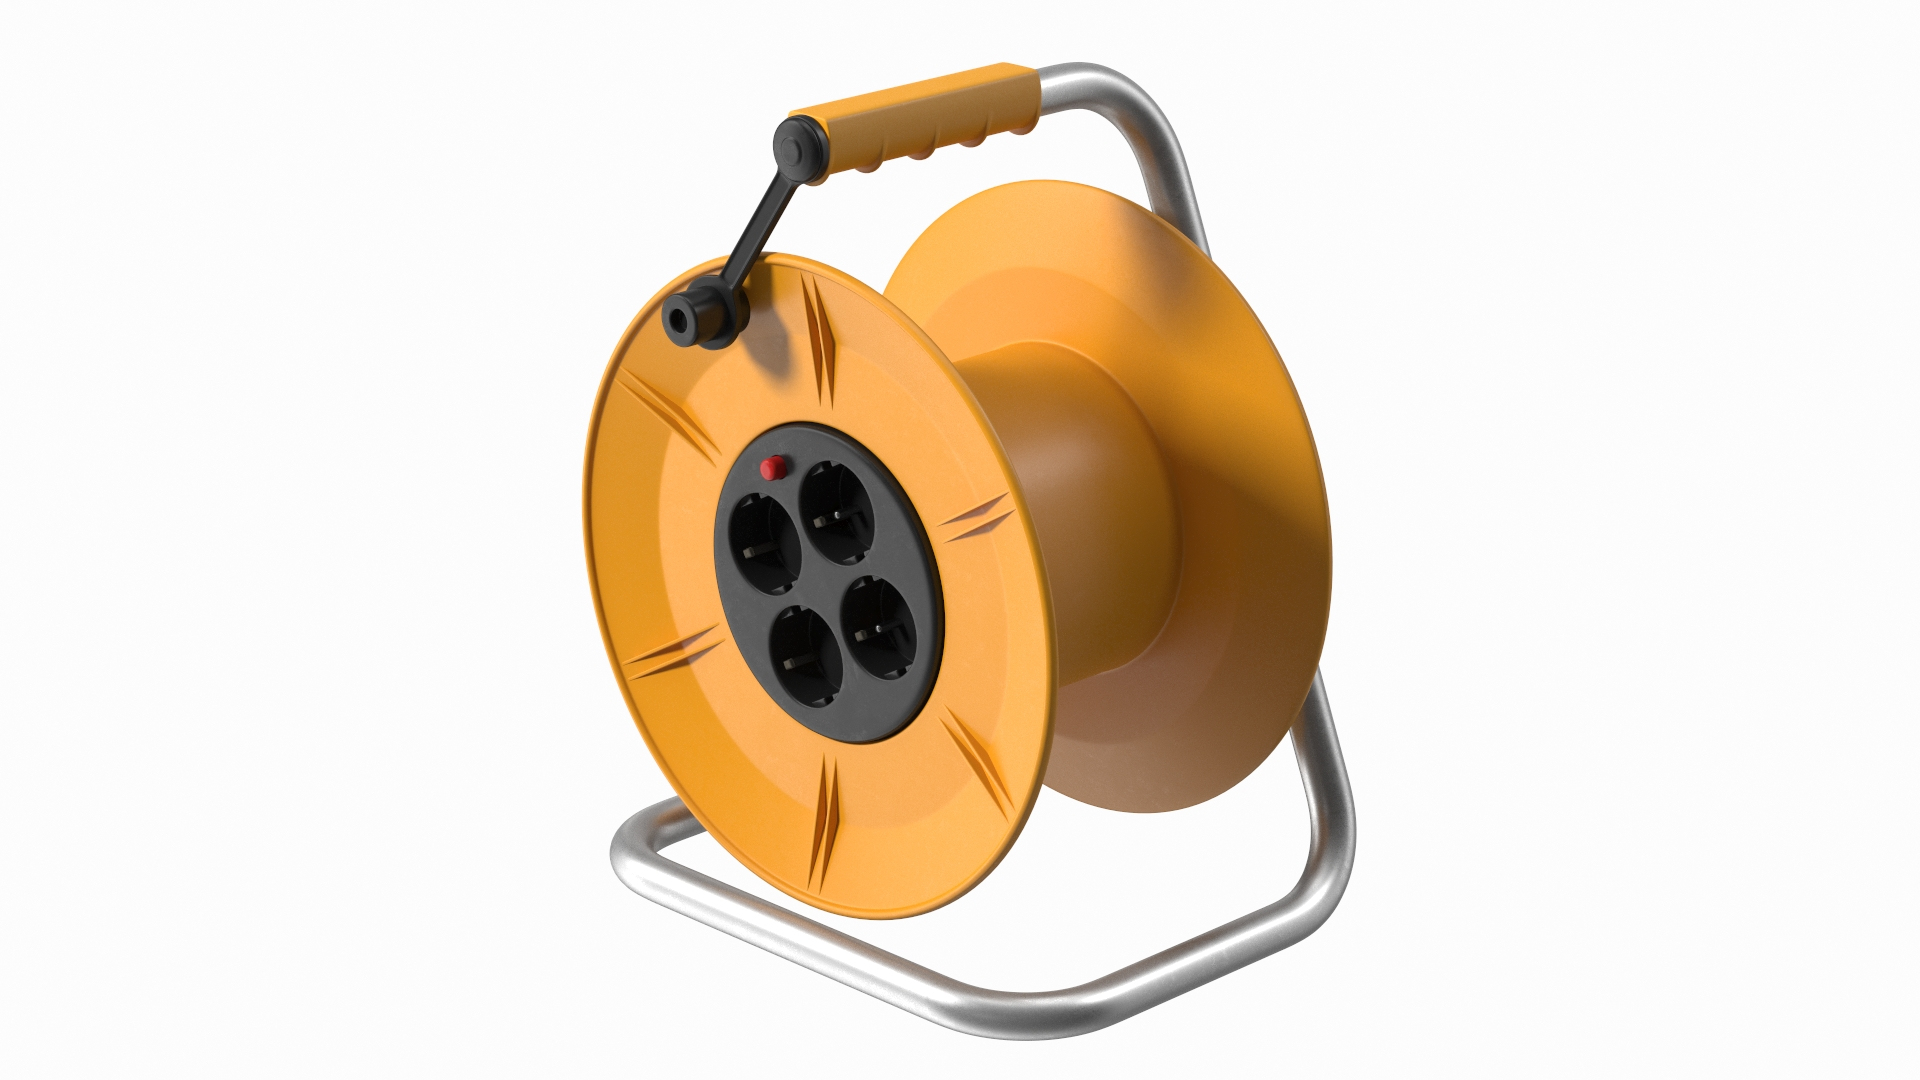 Empty Electric Cable Reel With CEE 7 Outlets Model - TurboSquid 1870877